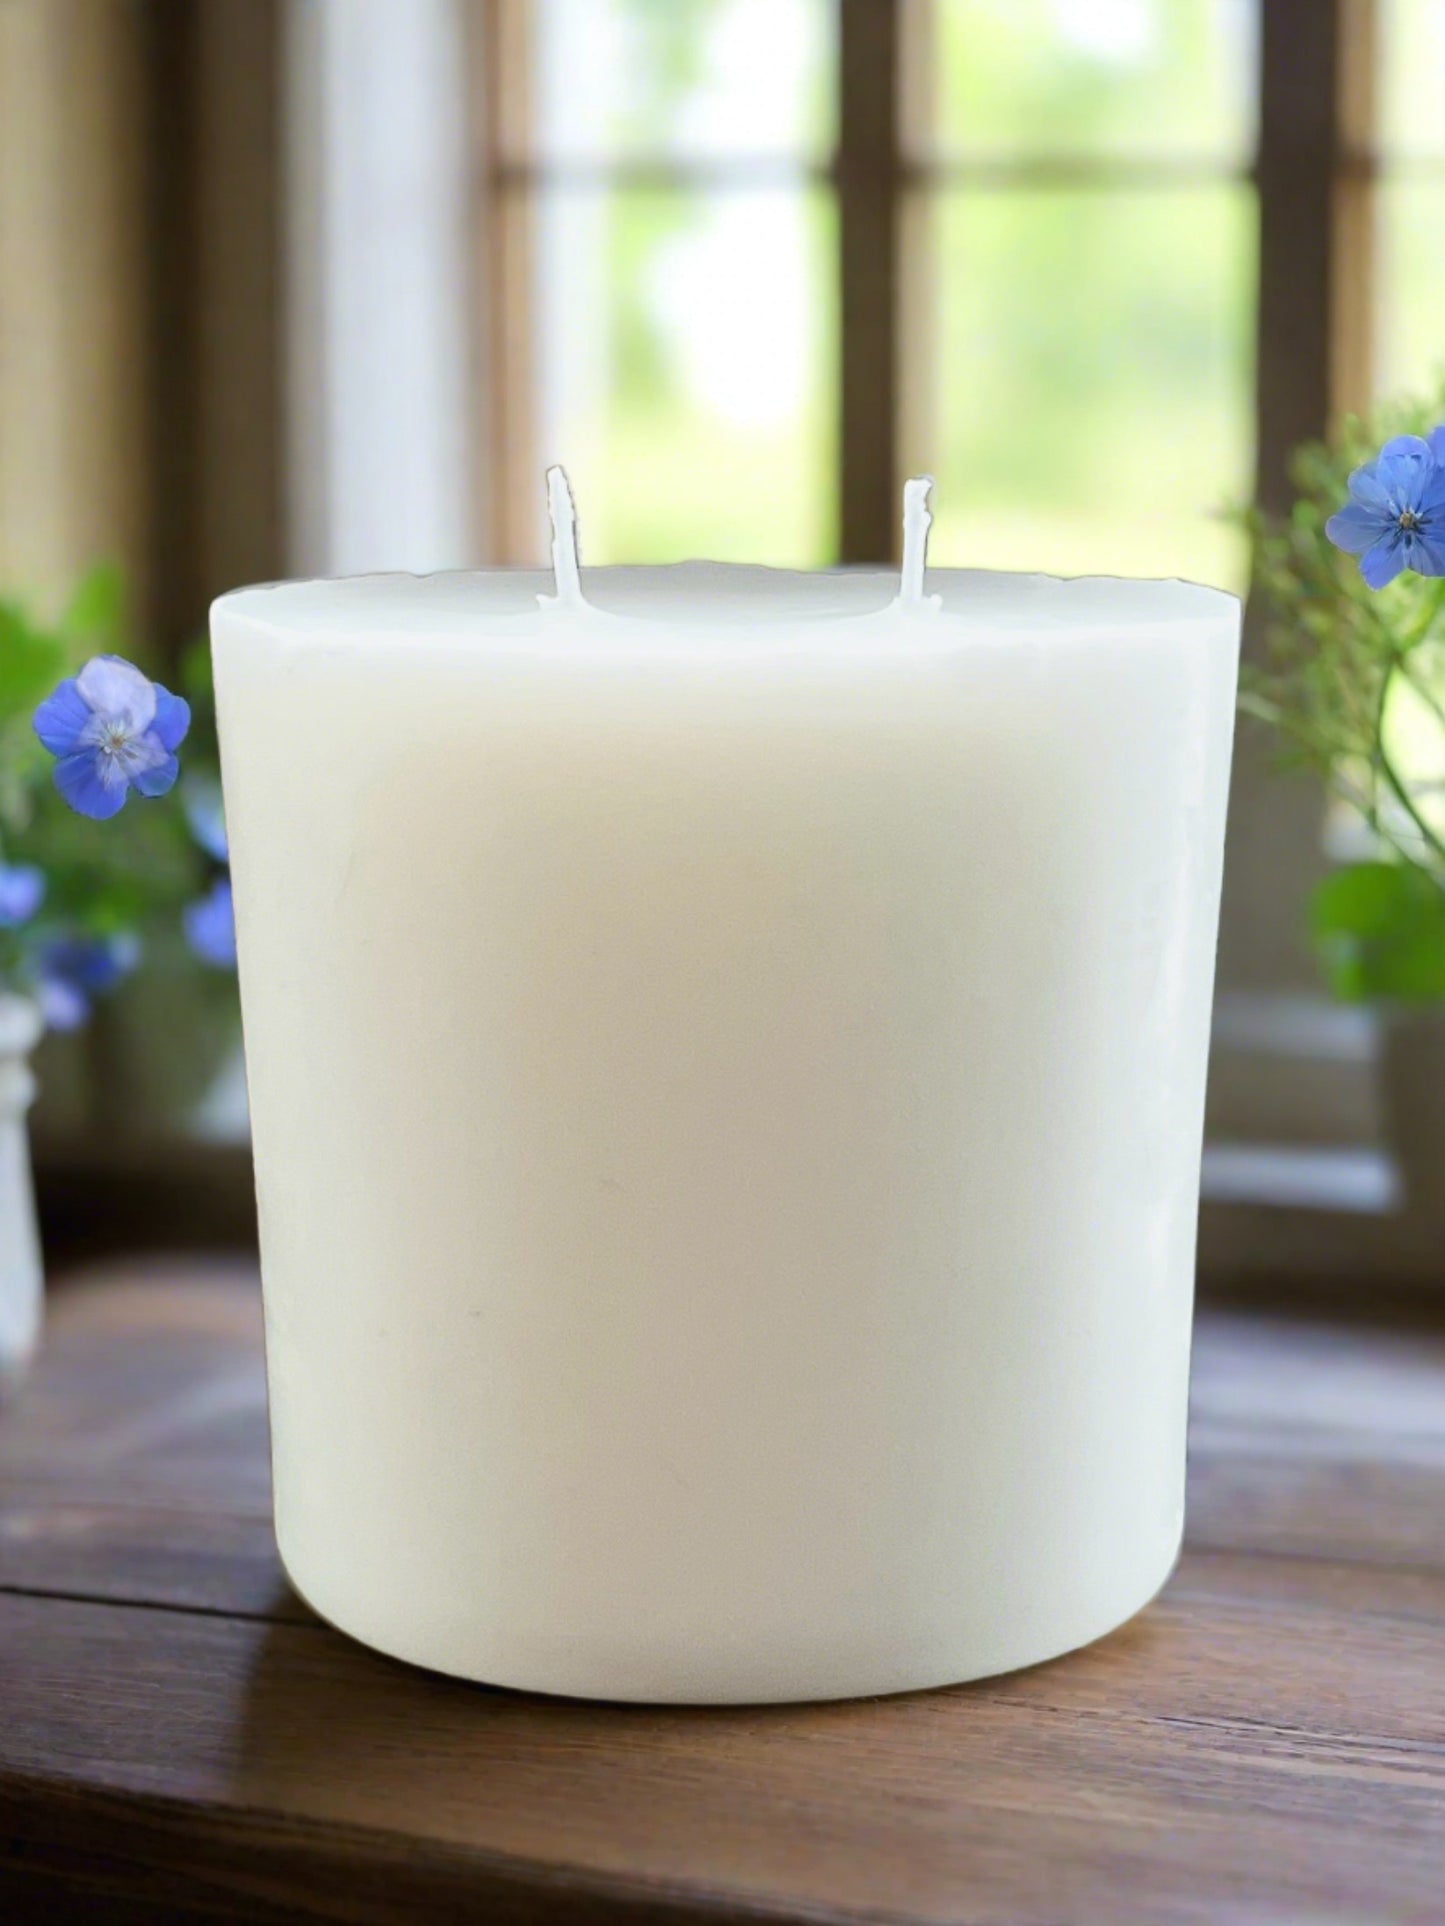 forget me not refill candle, aura refill, grey fox  candles